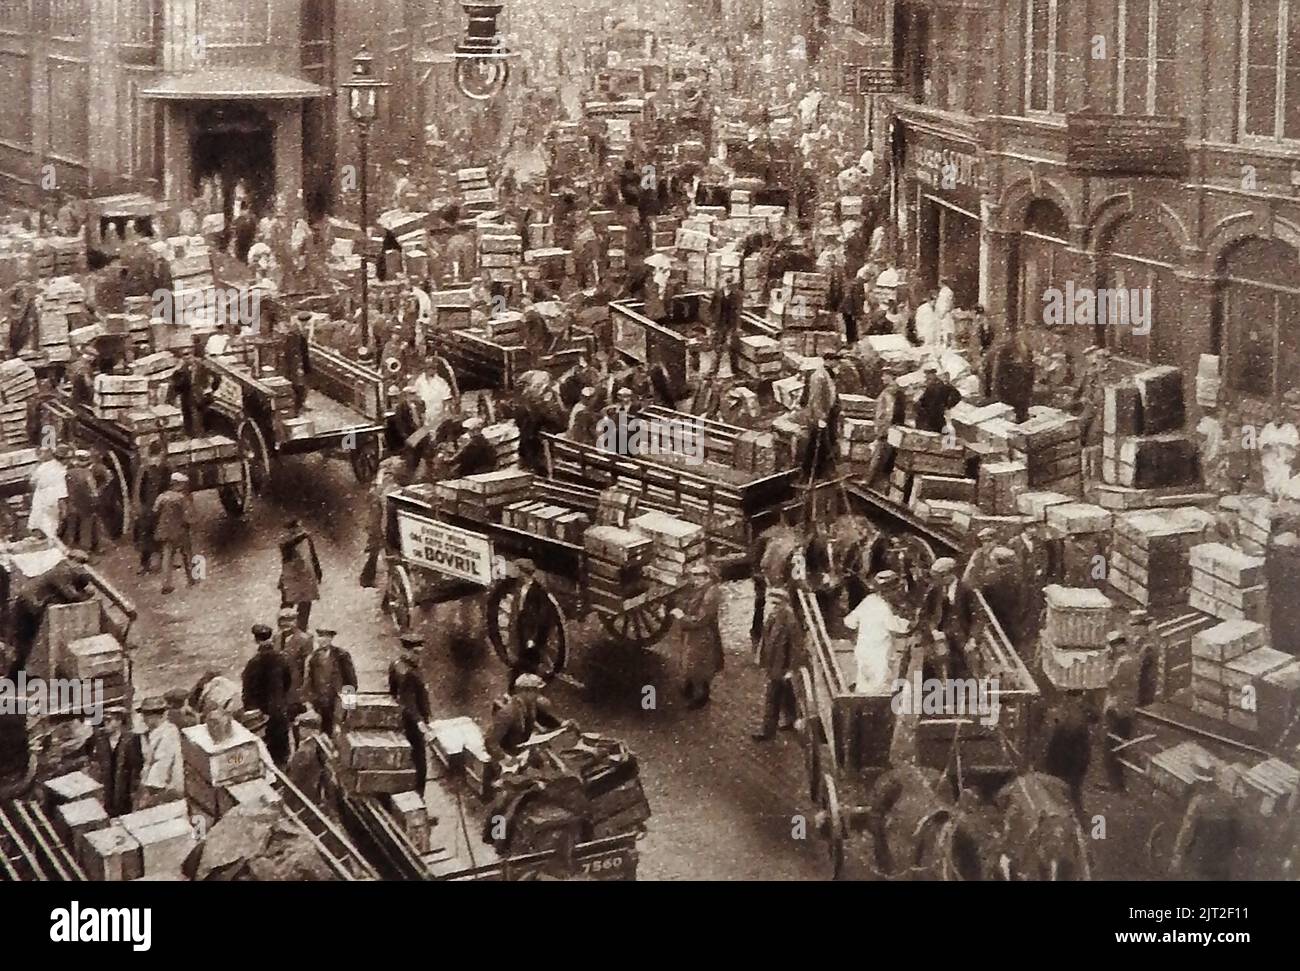 OLD LONDON -  A very early photograph ,c1930's , of a busy scene at London's old Billingsgate fish market. In 1982, the fish market was relocated to its present site from the one shown here which covered an area consisting of  Billingsgate Stairs , Wharf and Darkhouse Lane Stock Photo